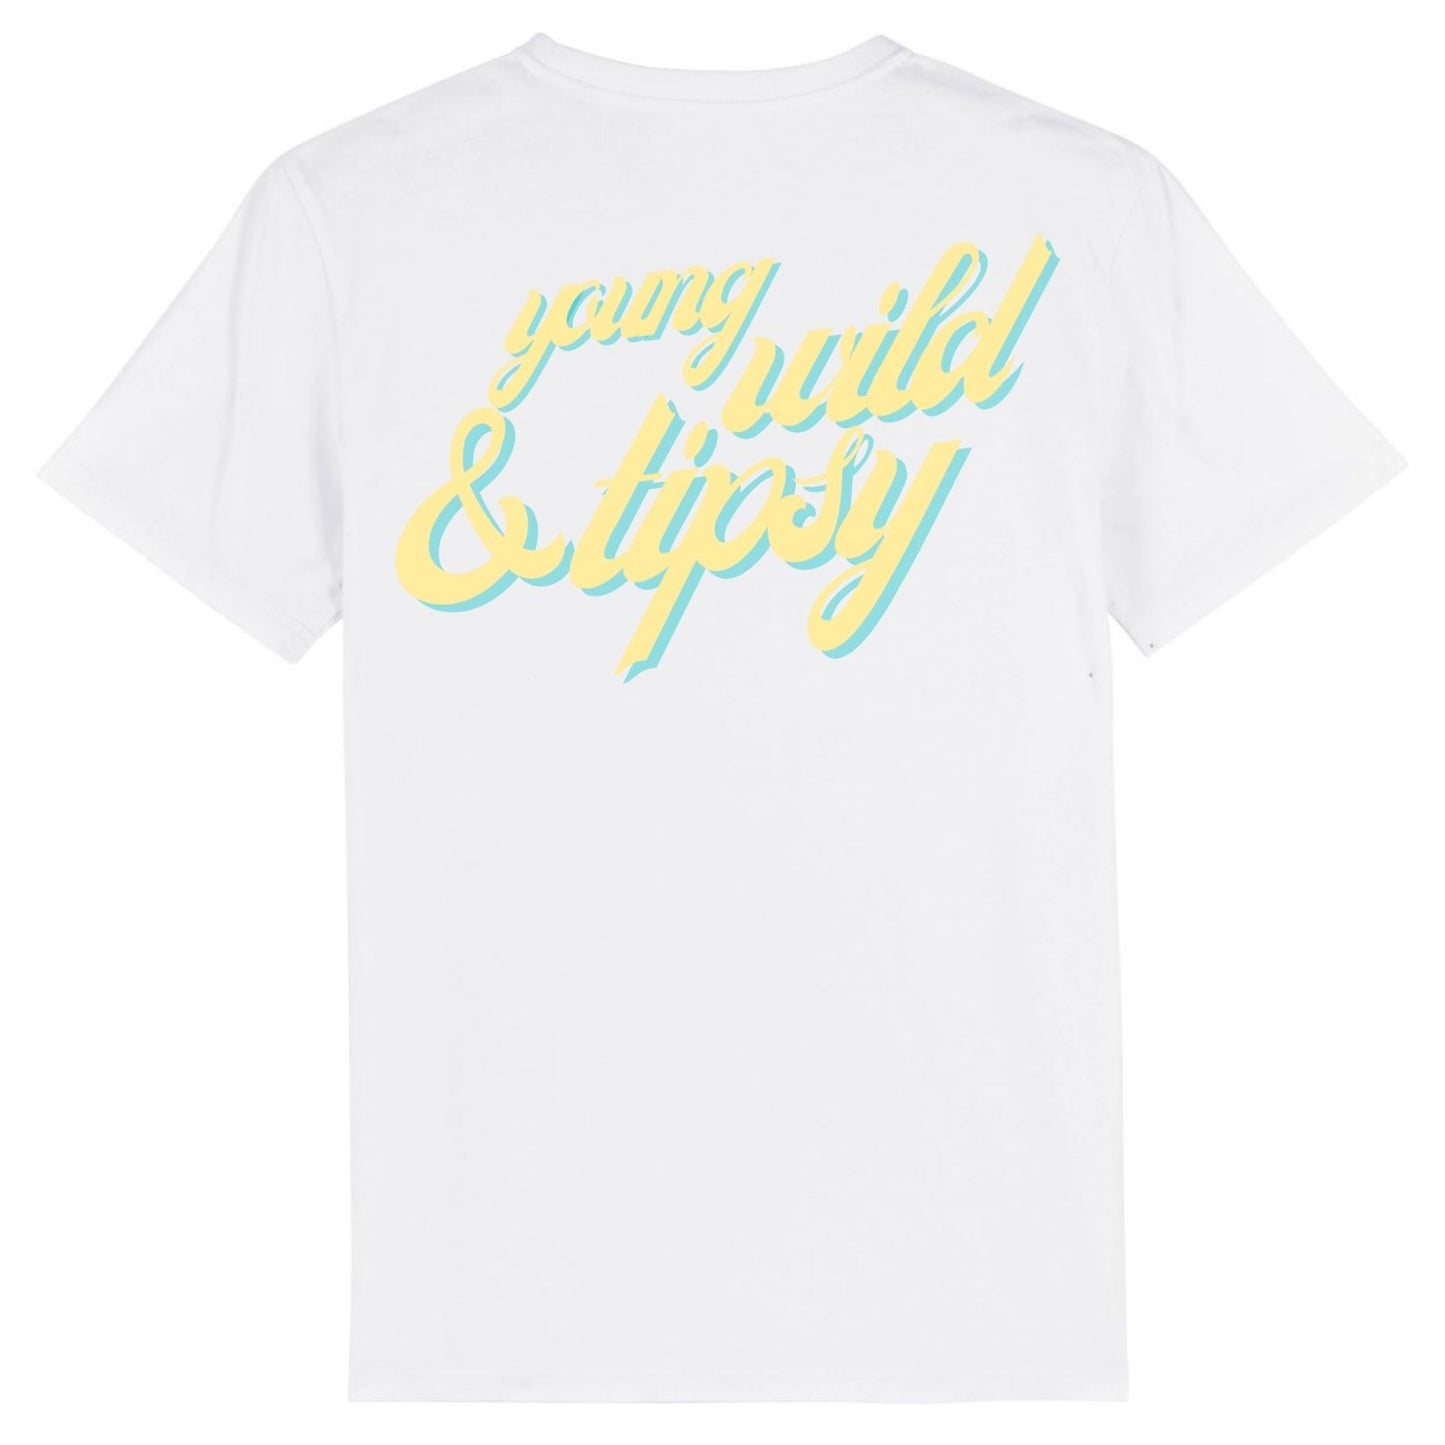 Young, wild and tipsy - Unisex Organic Shirt